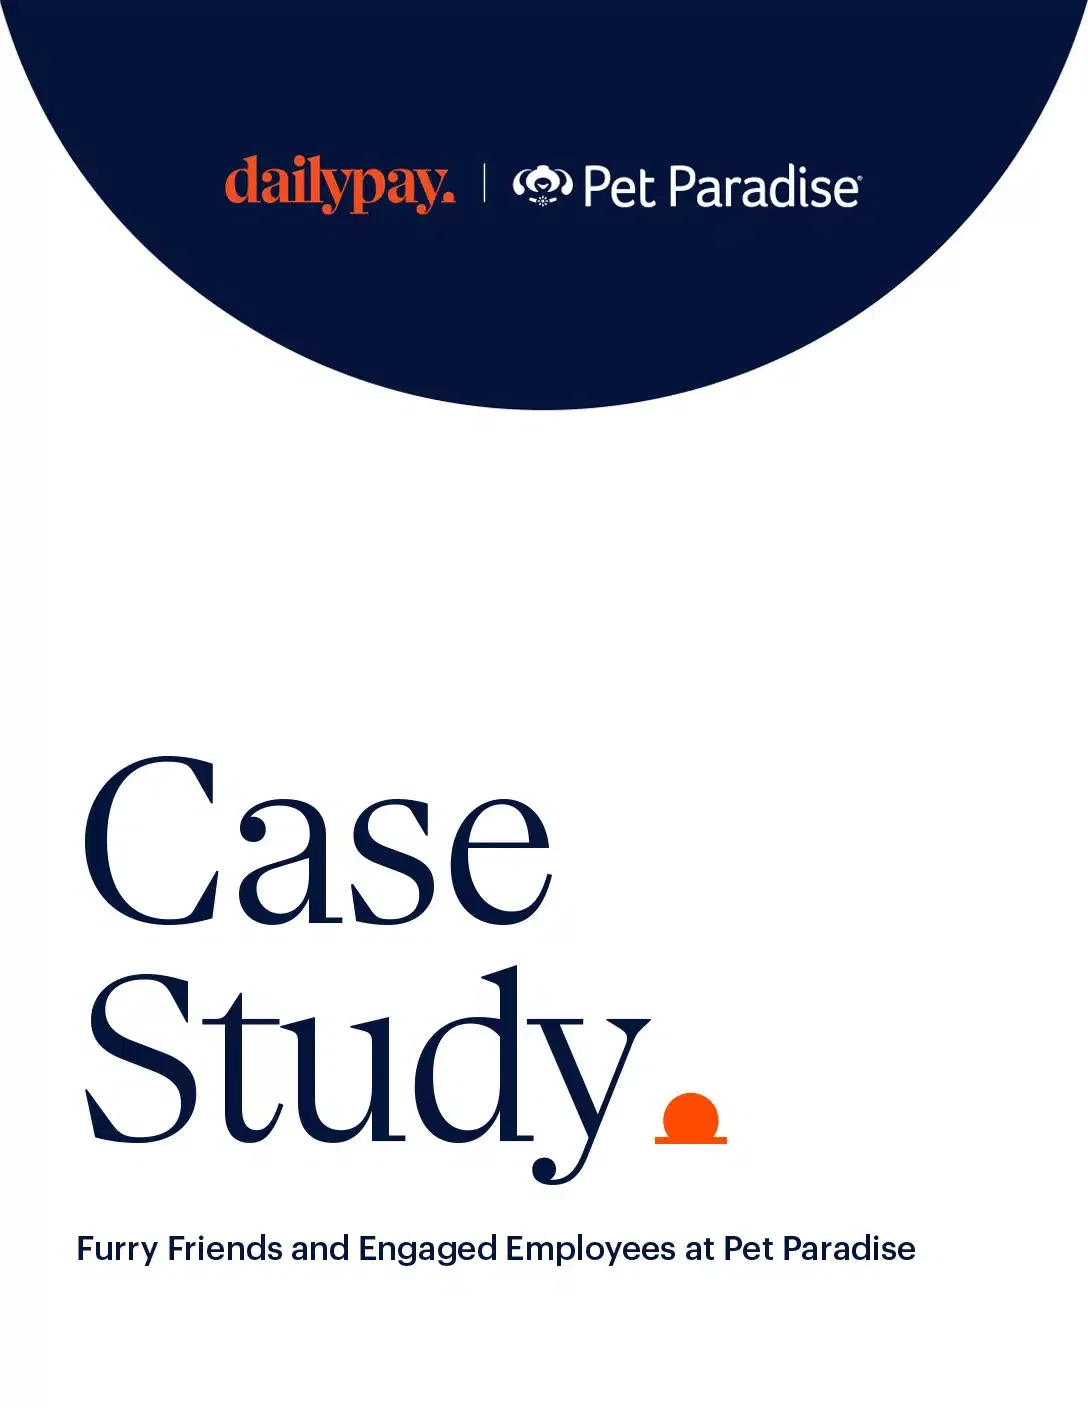 Cover of a case study titled "Furry Friends and Engaged Employees at Pet Paradise," featuring logos of DailyPay and Pet Paradise.